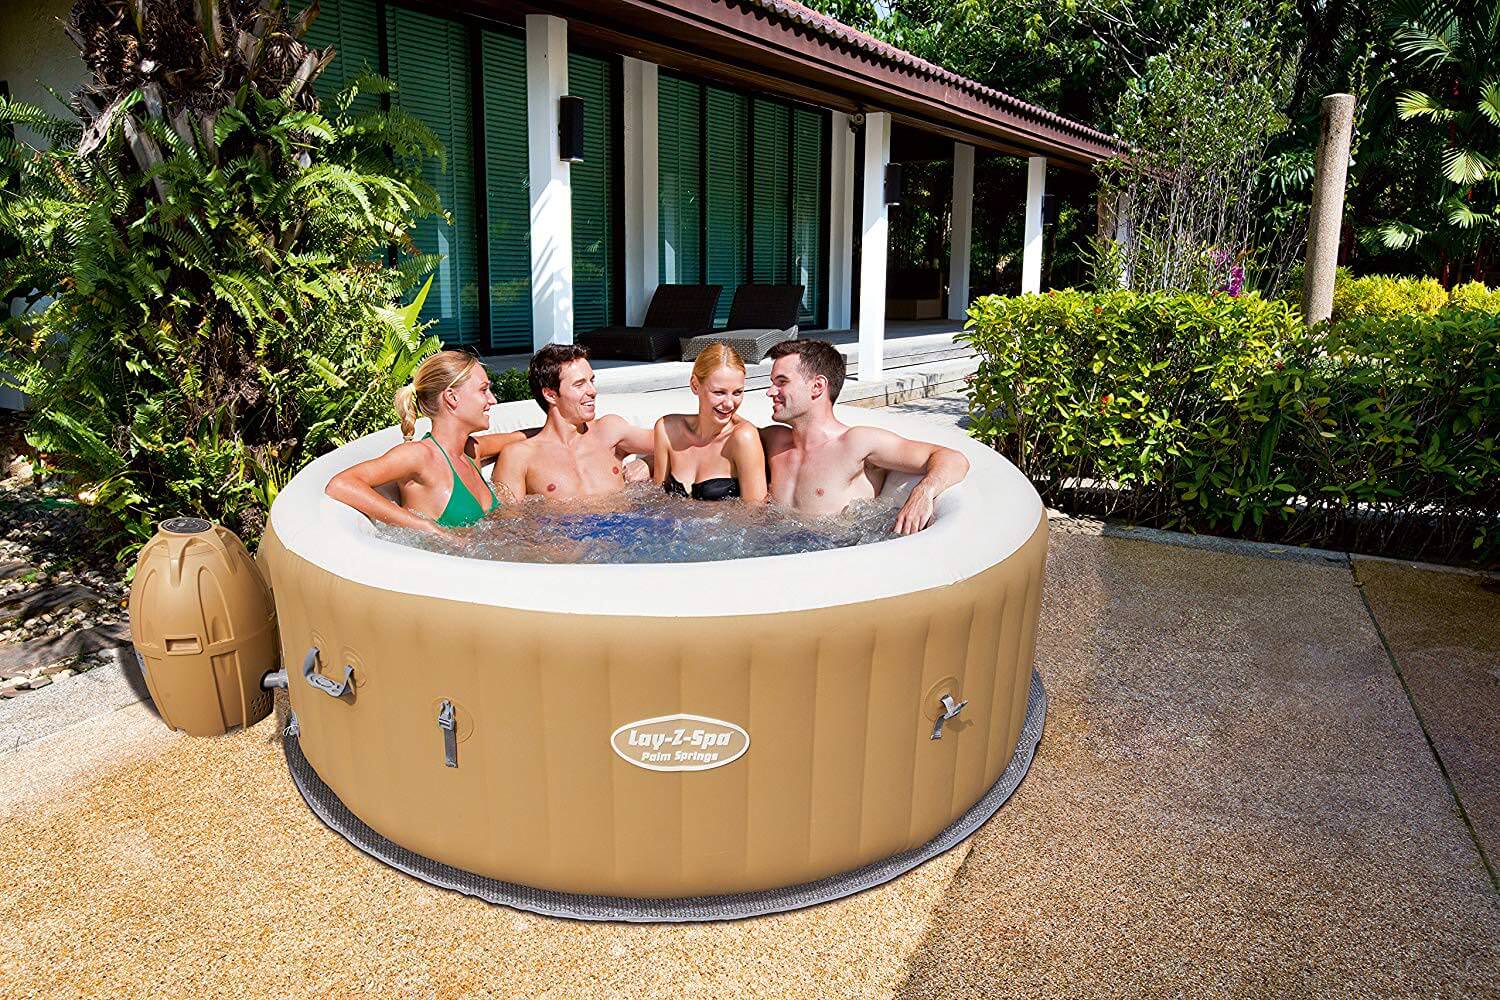 Bestway Lay-Z-Spa Tub 4-6 Palm Pure - Person Buildings Air Hot Inflatable Jet Garden Springs